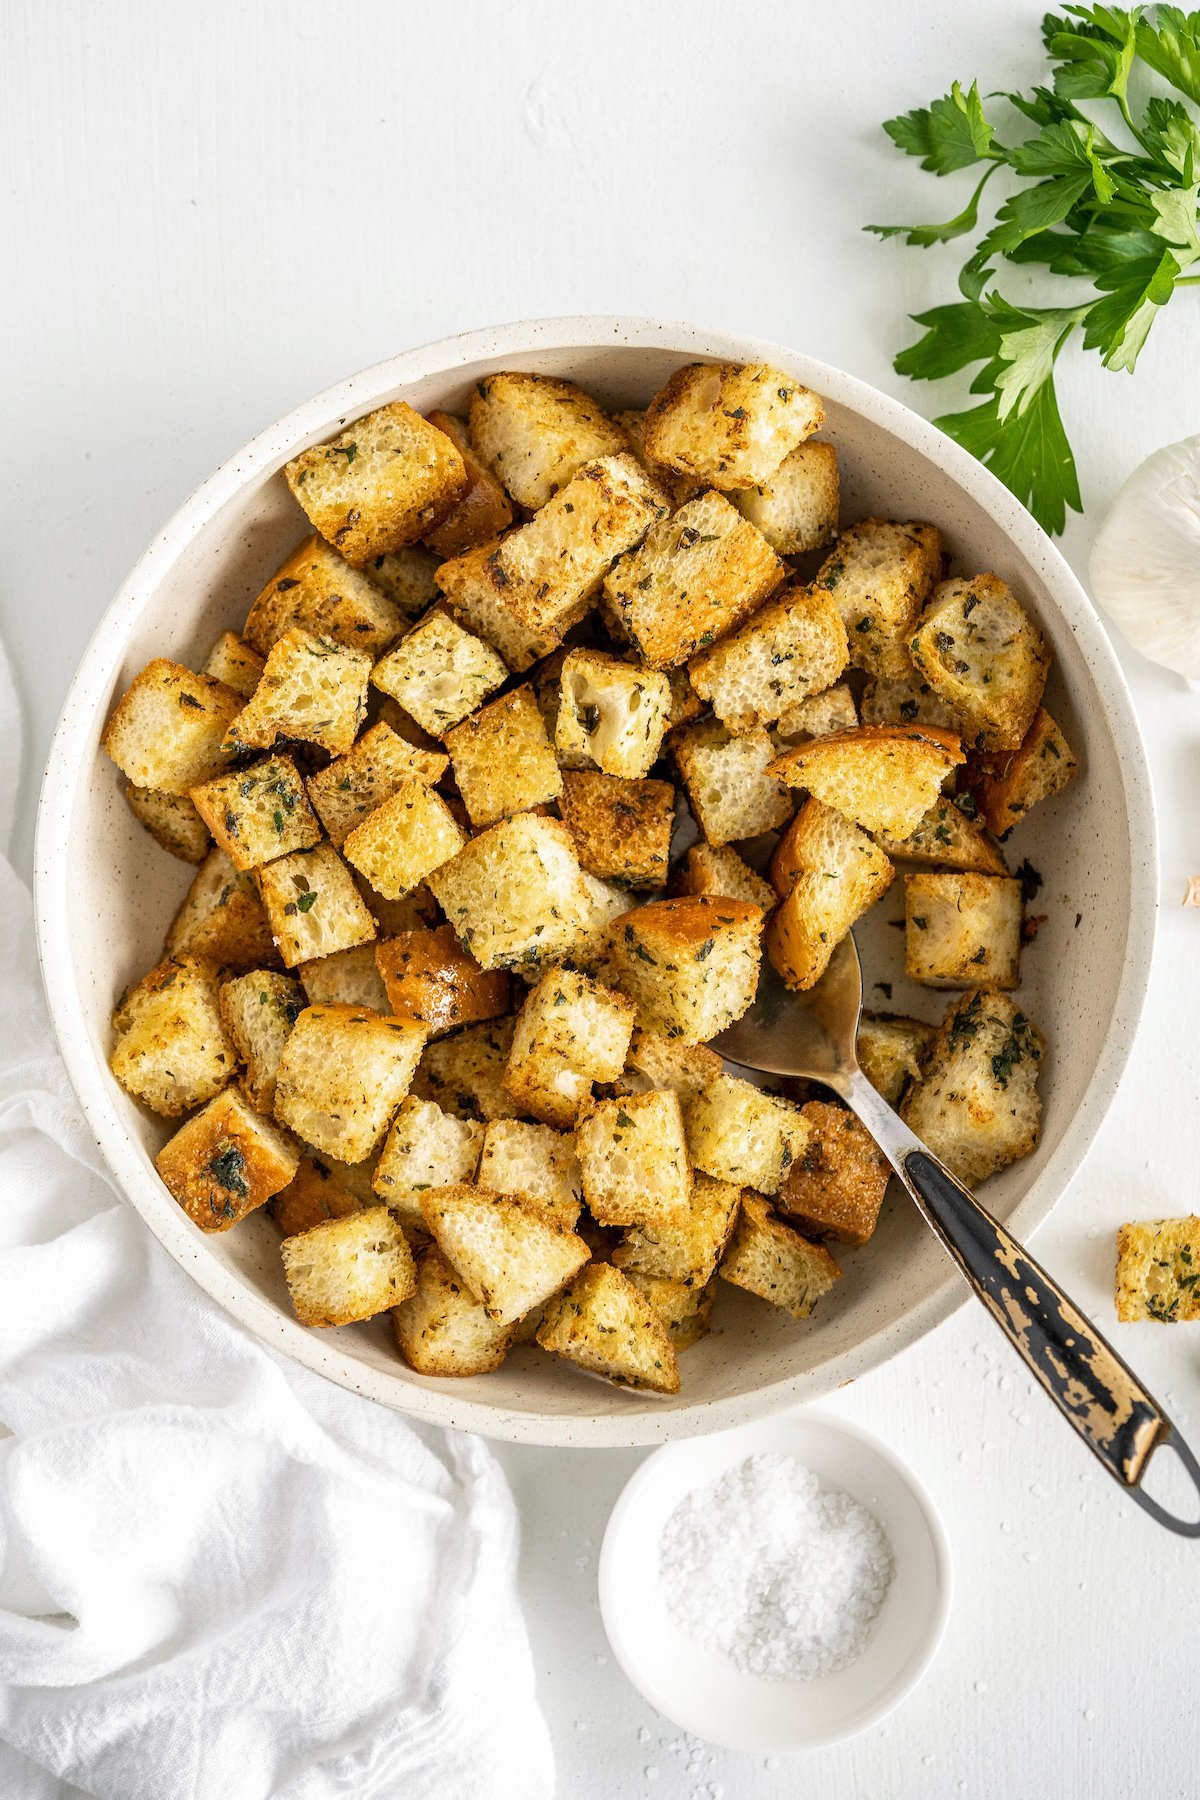 Bowl of homemade croutons.